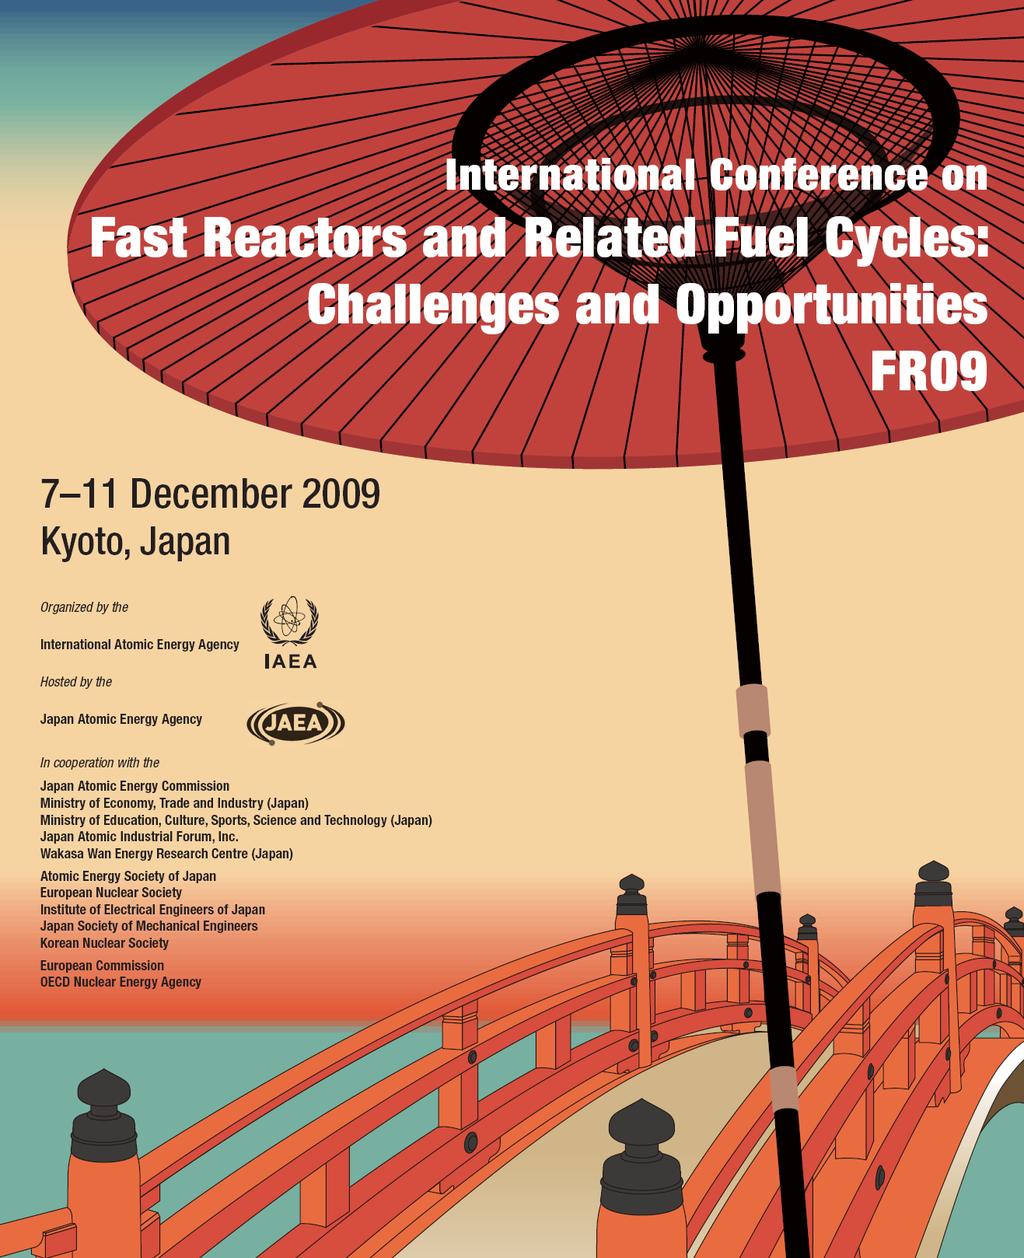 Nuclear Data for Innovative Fast Reactors: Impact of Uncertainties and New Requirements G.Palmiotti 1, M.Salvatores 1, 2, M.